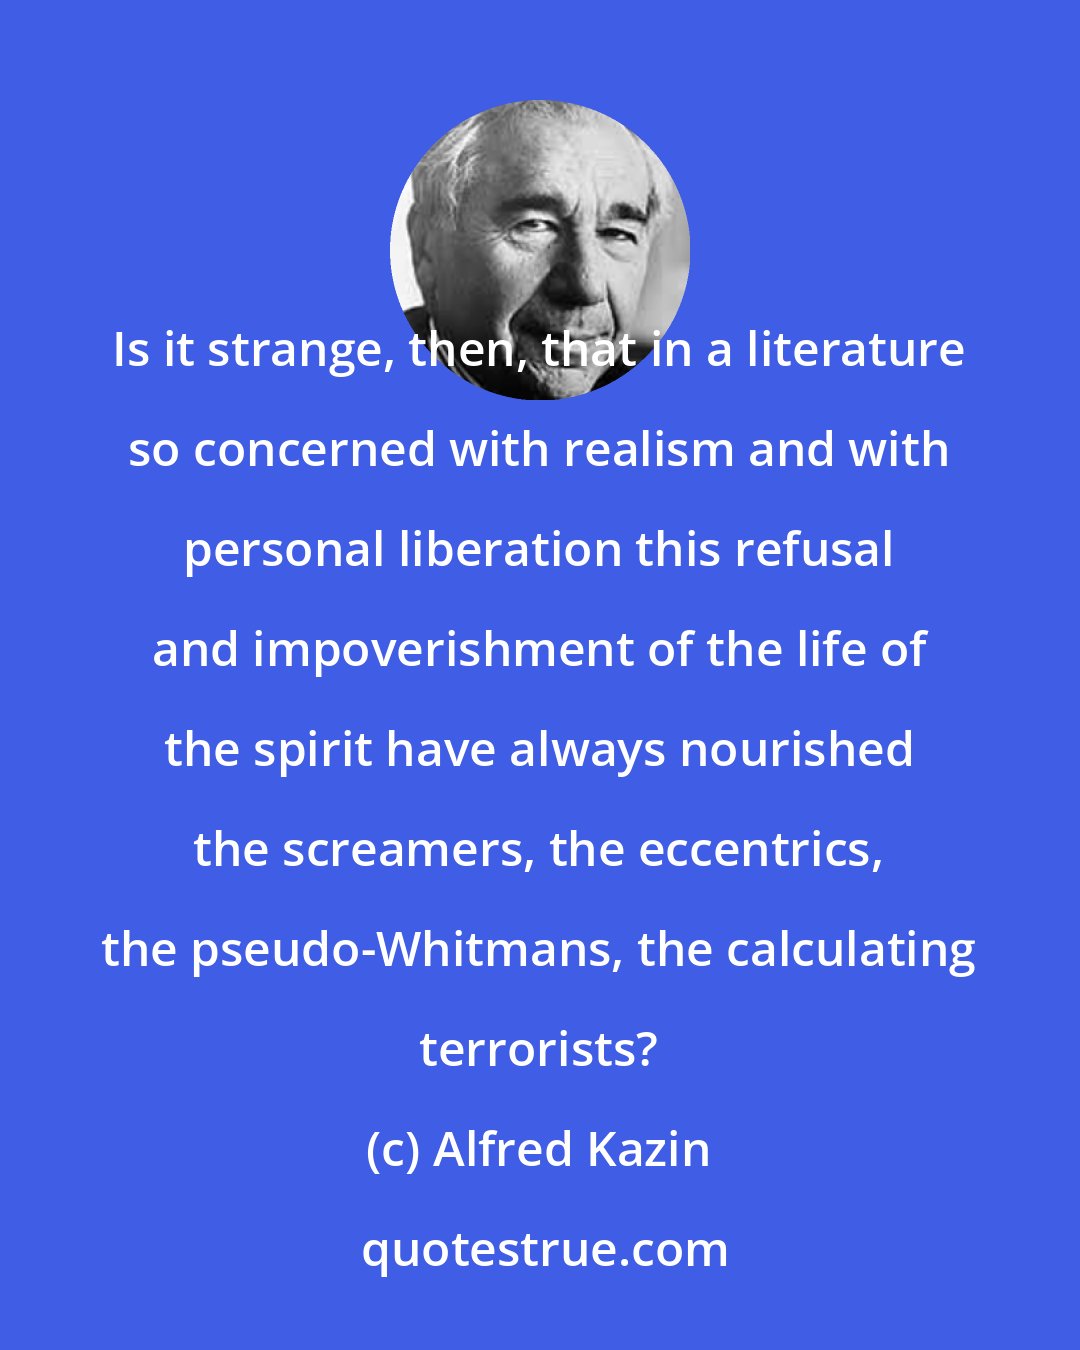 Alfred Kazin: Is it strange, then, that in a literature so concerned with realism and with personal liberation this refusal and impoverishment of the life of the spirit have always nourished the screamers, the eccentrics, the pseudo-Whitmans, the calculating terrorists?